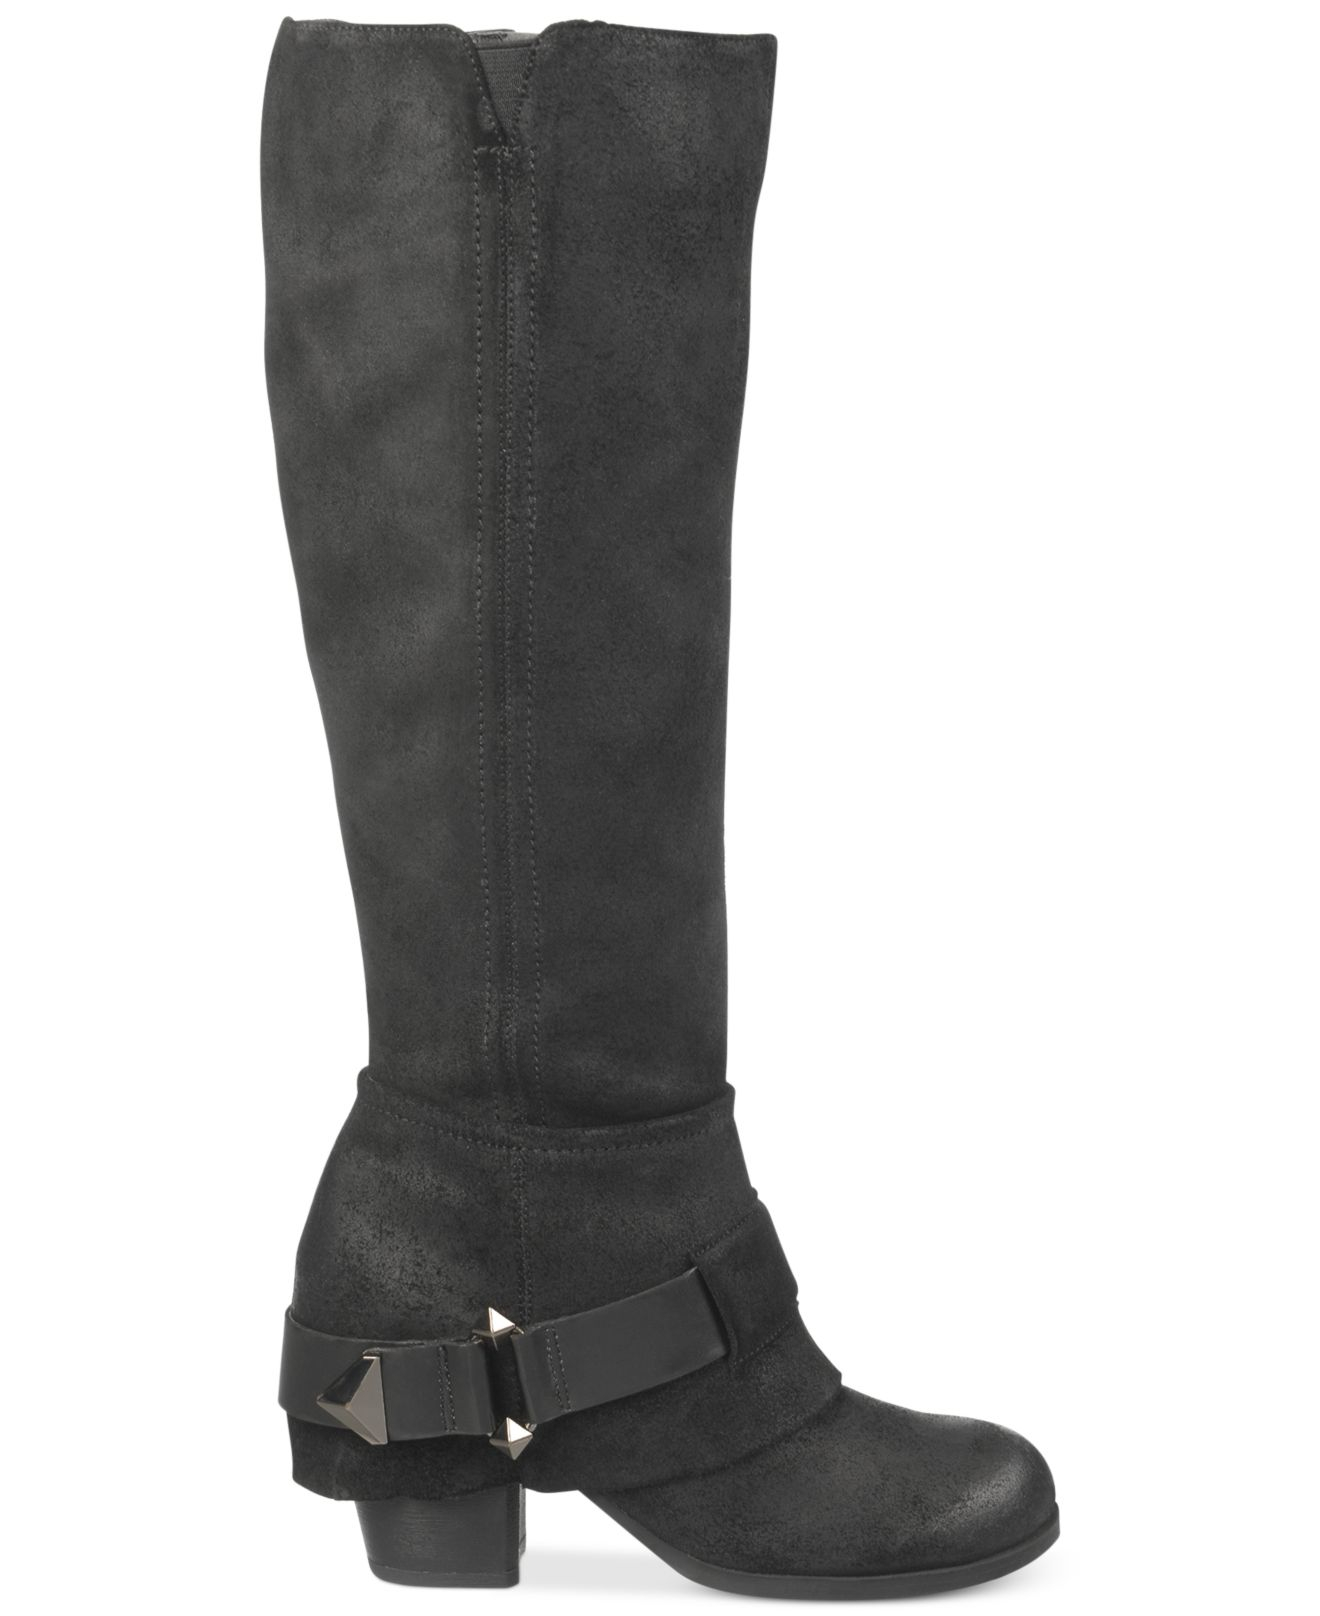 Fergie Theory Tall Boots in Black - Lyst